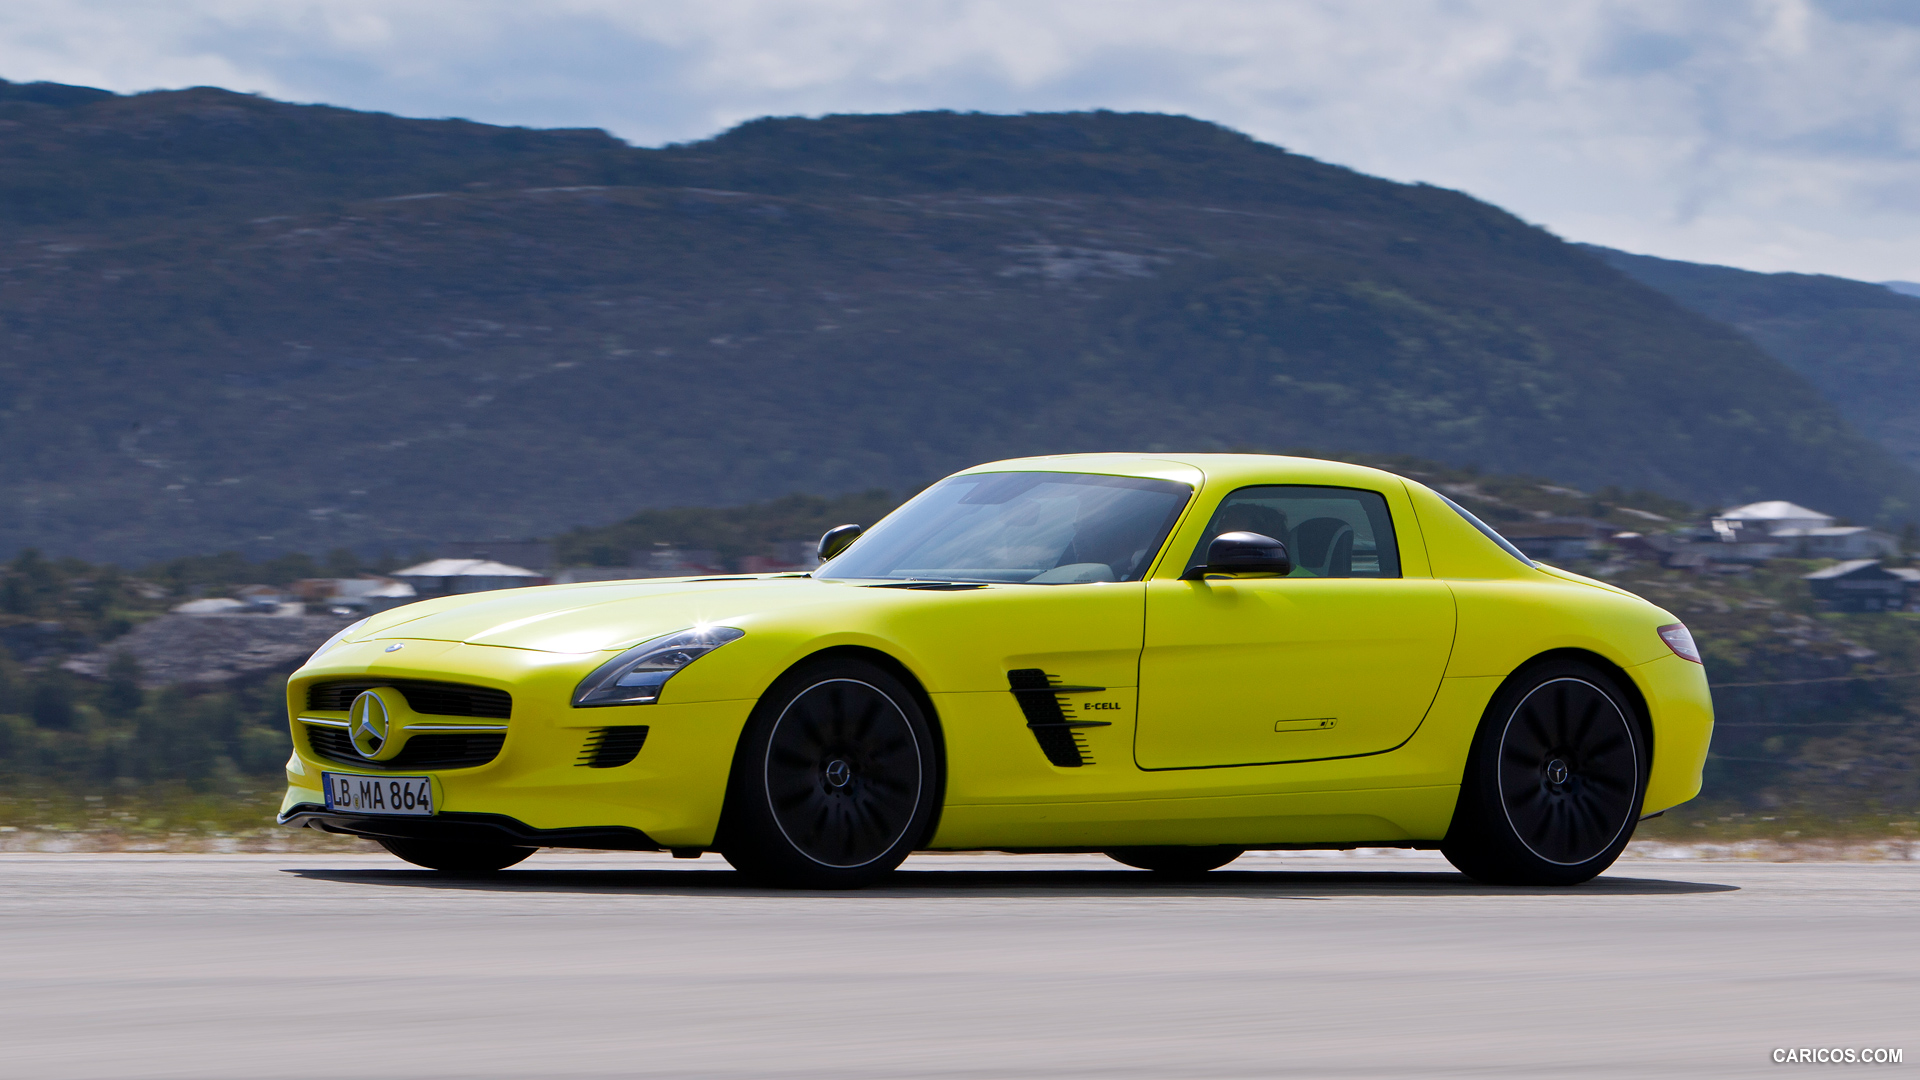 Mercedes-Benz SLS AMG E-CELL Concept  - Front, #36 of 60